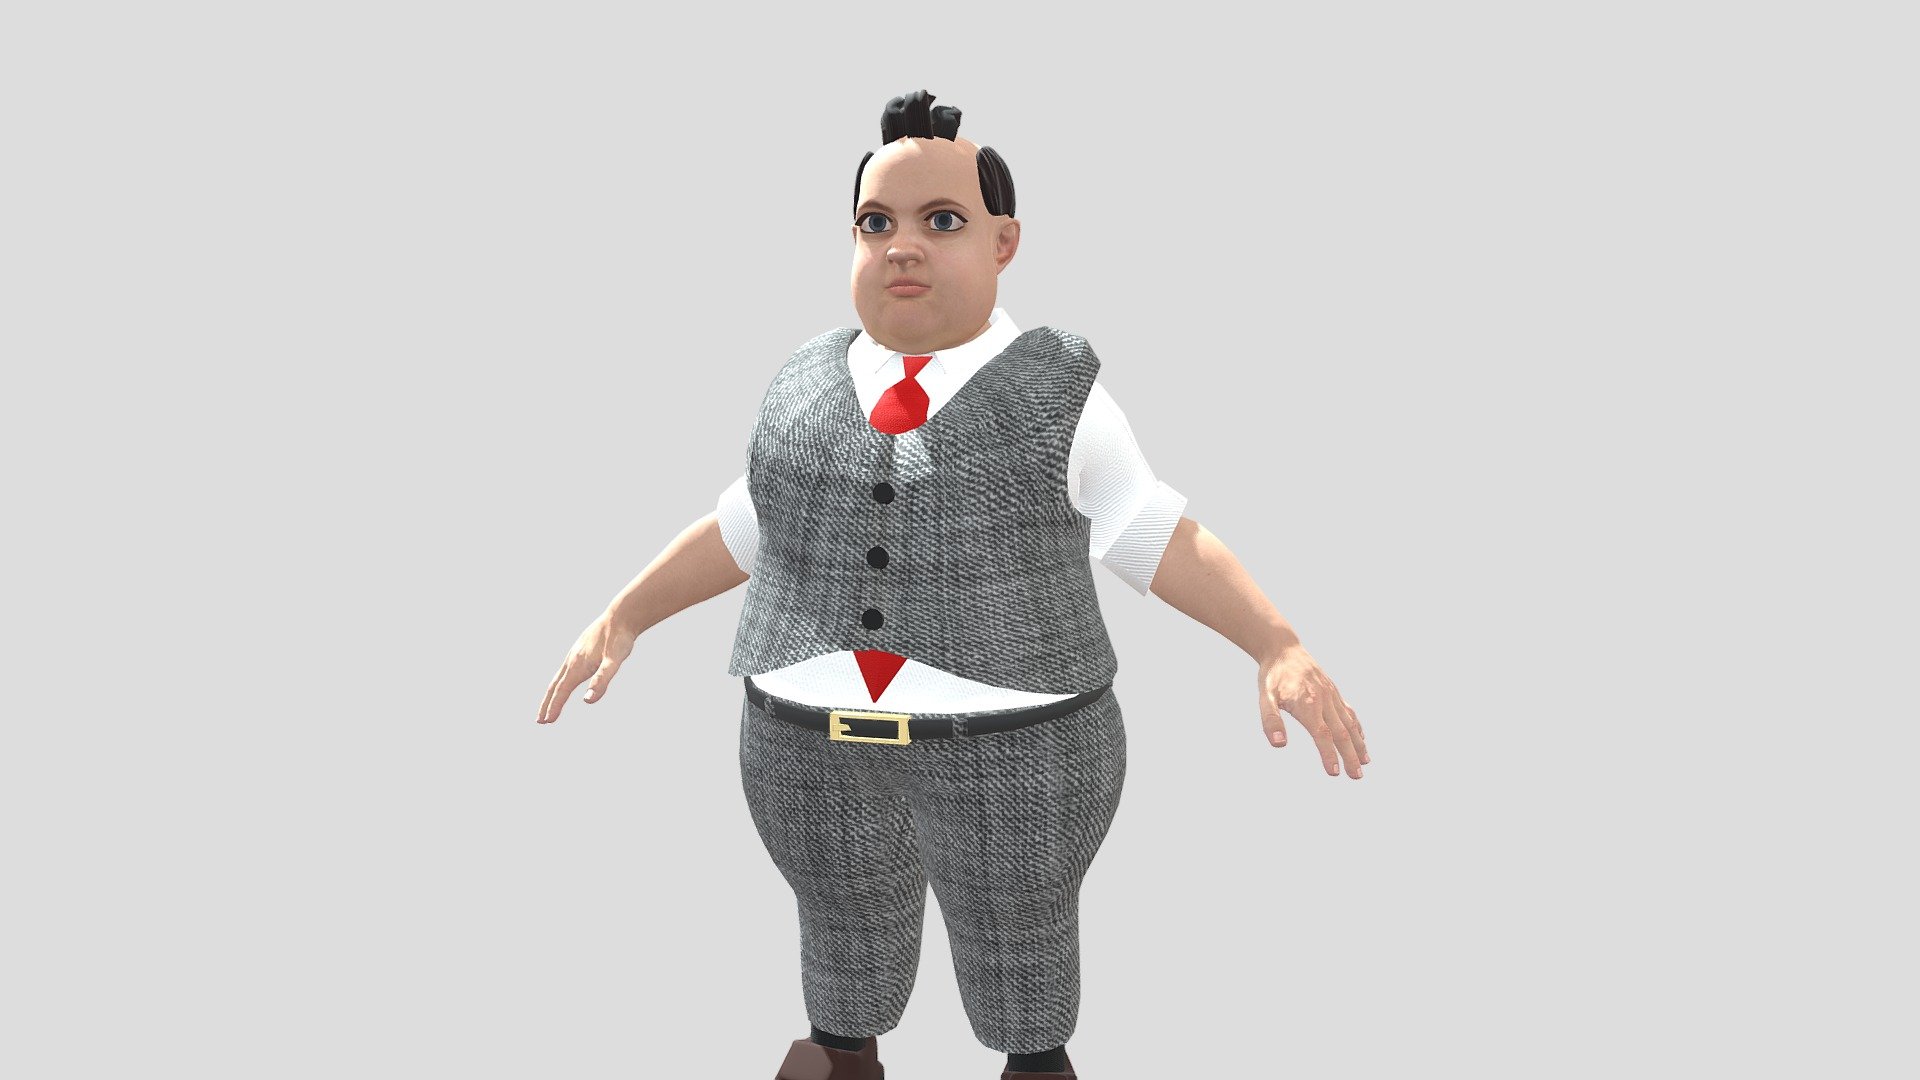 Fat Man Cartoonized  in suit 3d game character - Fat Man Cartoonized  in suit 3d game character - 3D model by Agarkova_CG 3d model